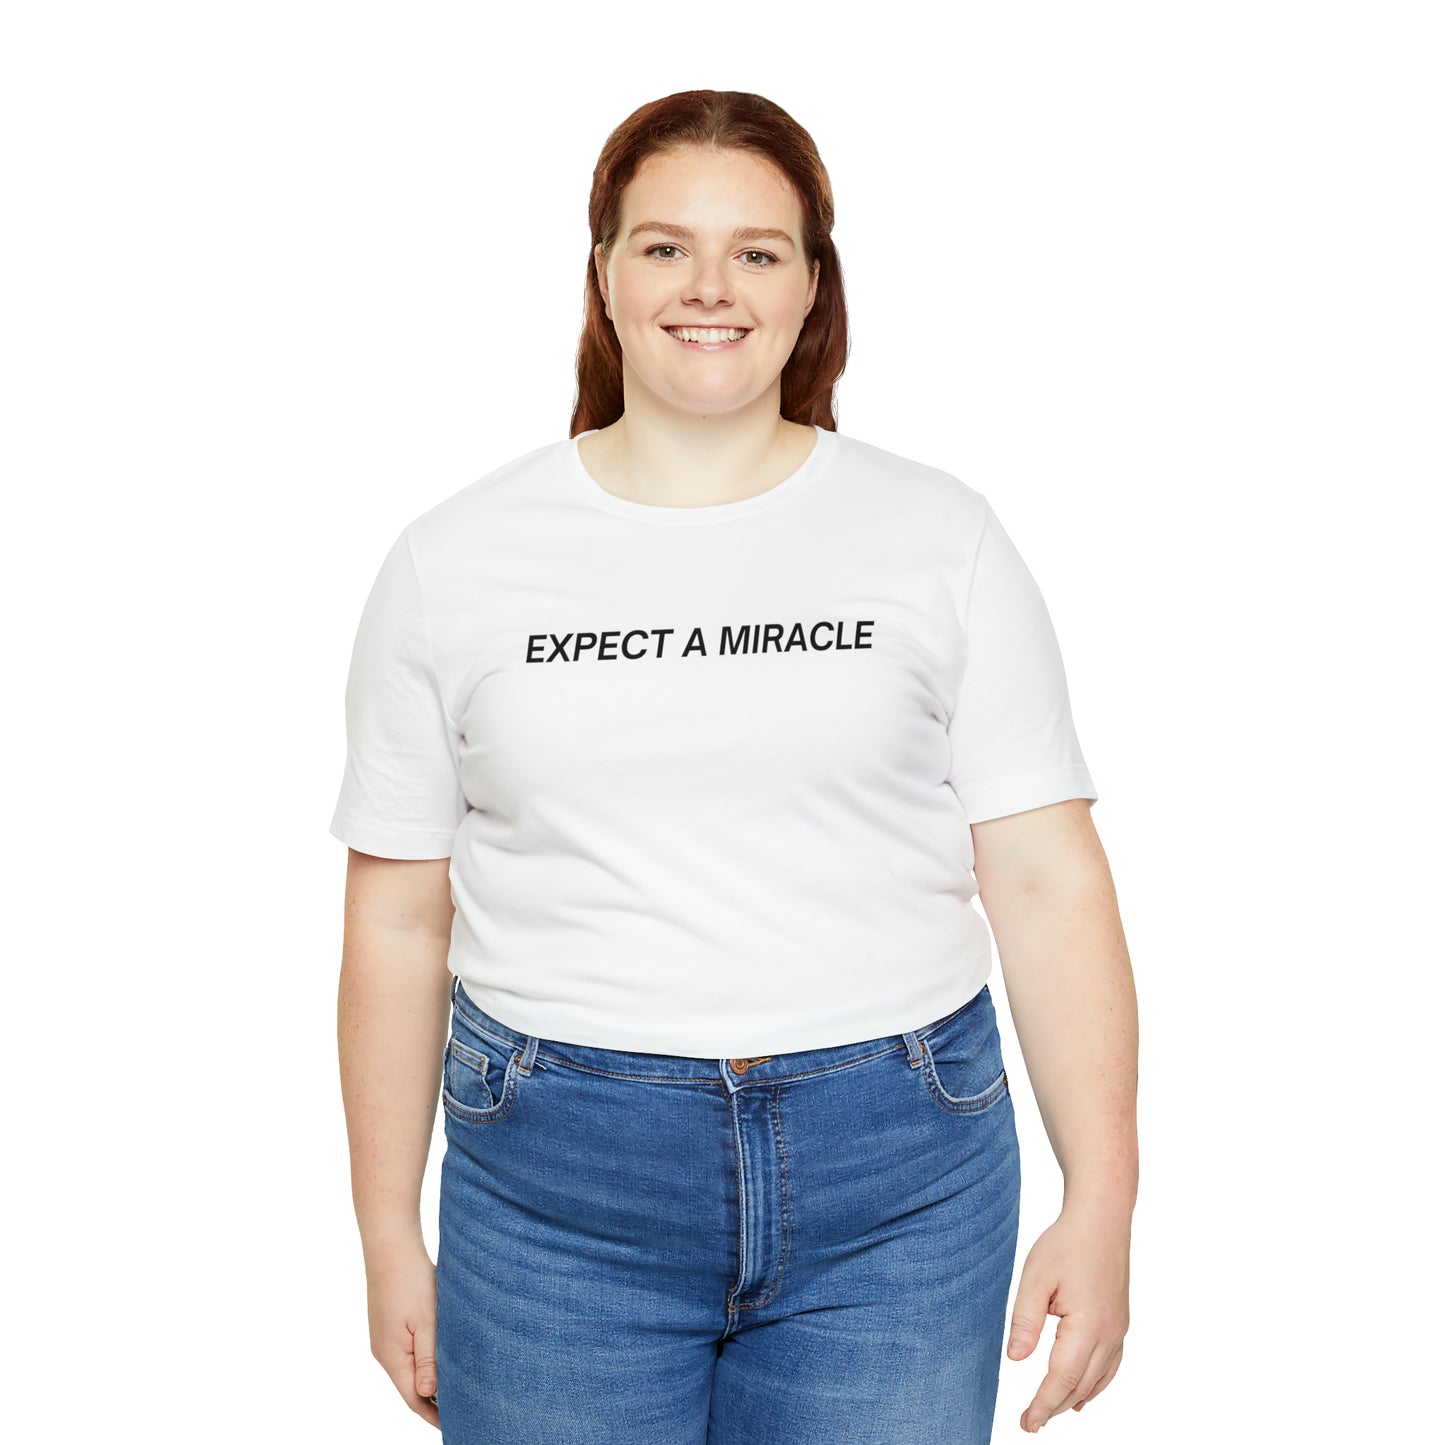 "Expect a Miracle" Short Sleeve Tee